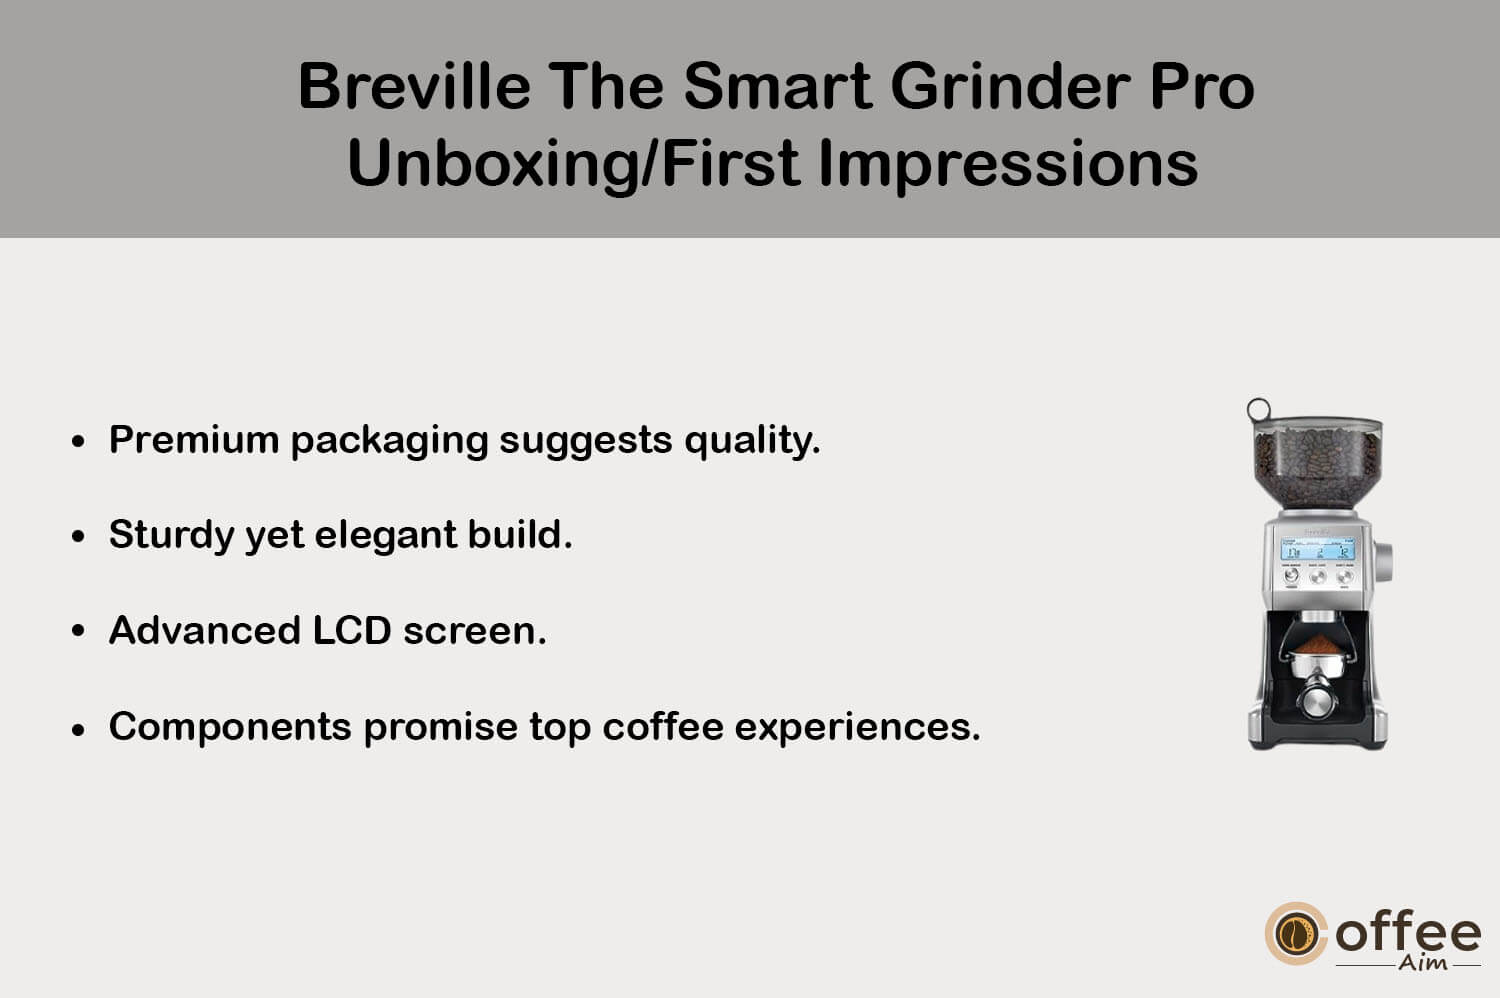 This captivating image encapsulates the exhilarating unboxing and initial impressions of the Breville The Smart Grinder Pro BCG820BSSXL, as detailed in our comprehensive review article titled "Breville The Smart Grinder Pro BCG820BSSXL Review." Experience the excitement of unwrapping and encountering this remarkable grinder for the first time.